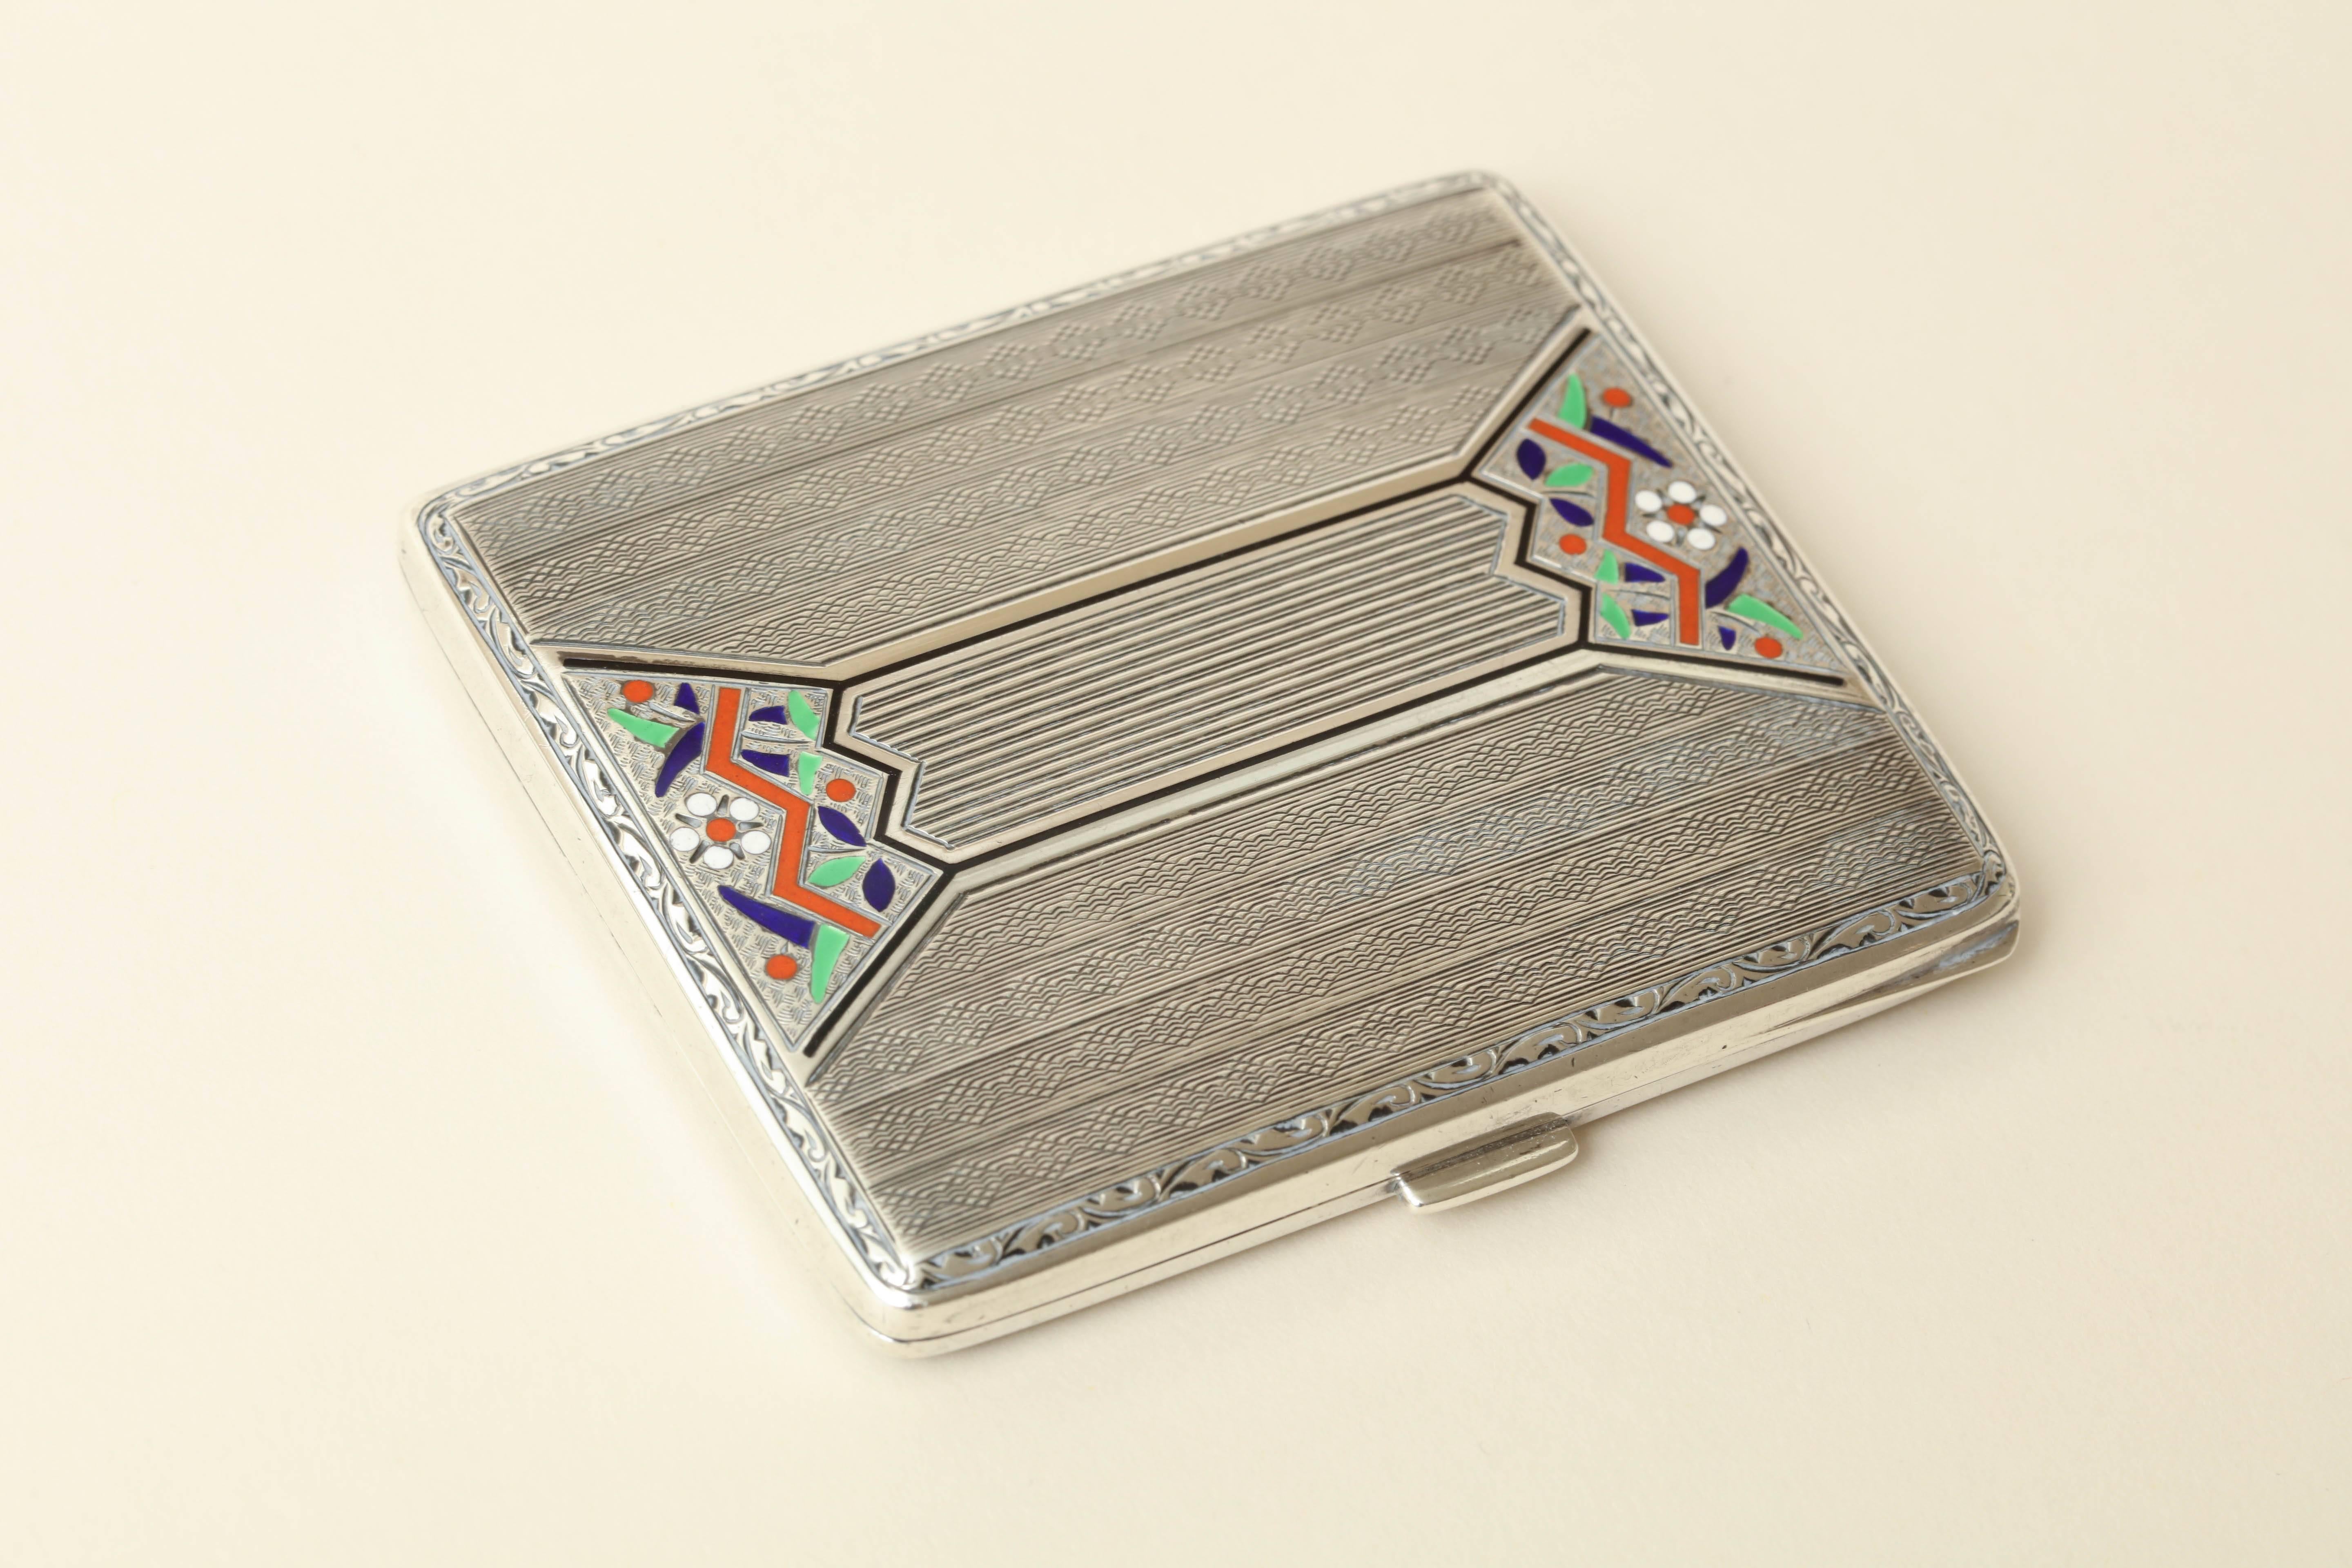 Measures: 3 1/4'' high; 2 11/16'' wide.
3.25 ozs.

Continental sterling silver cigarette case with champleve coral, blue, green, white and black enamel design.
Impressed for 925 silver/ imported and assayed at Birmingham/ 1928/ V.W. importers